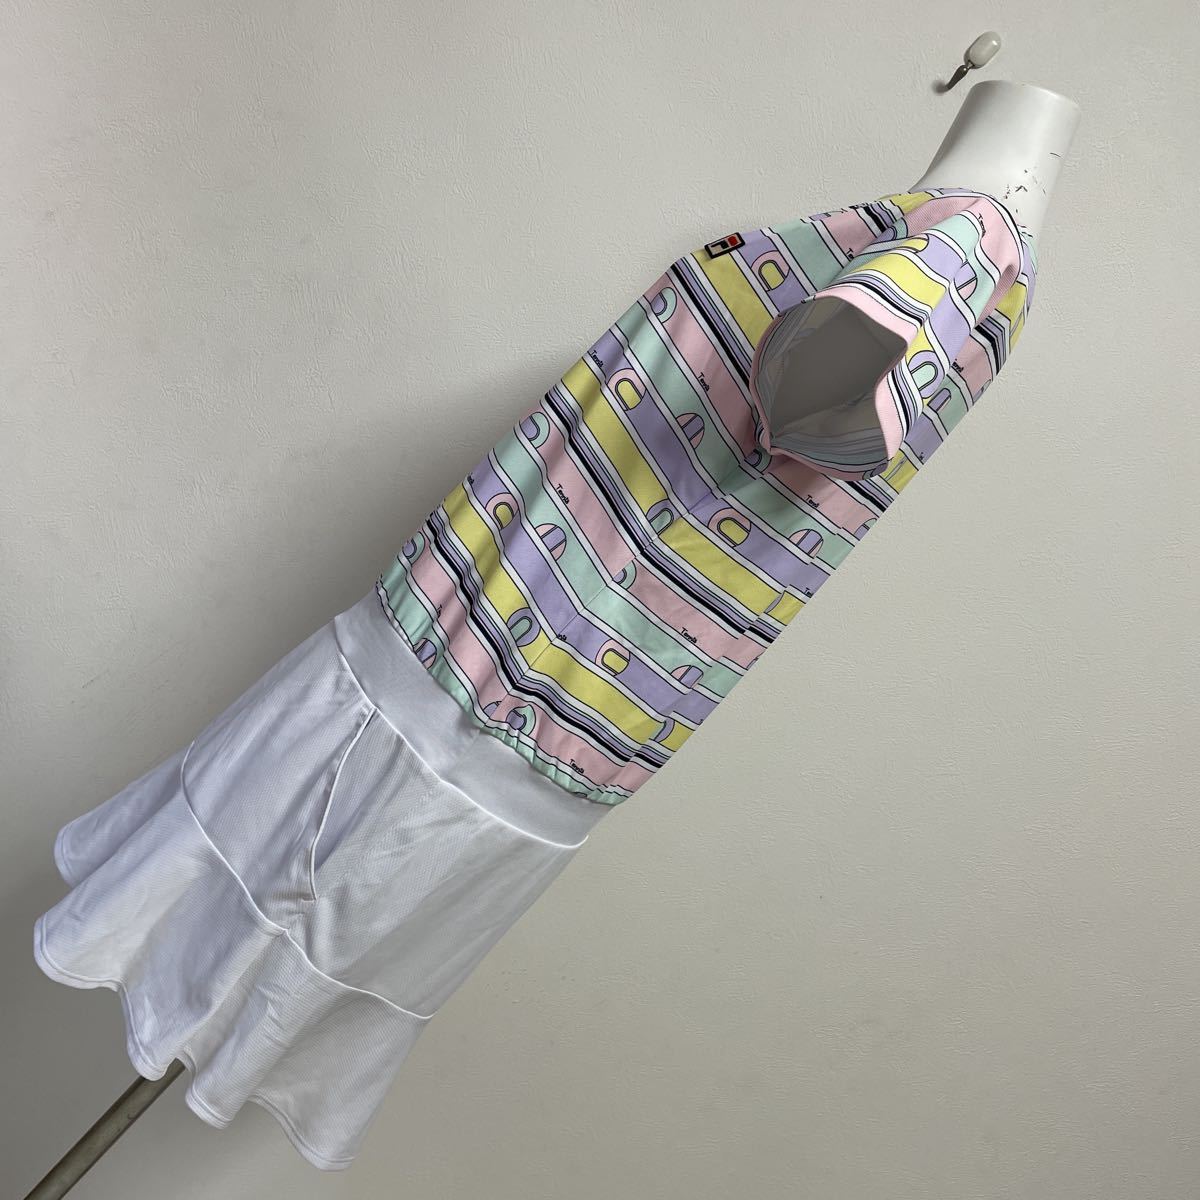  new goods FILA filler lady's tennis wear One-piece UV cut . water speed .f trumpet - style white size XL unused tag attaching 